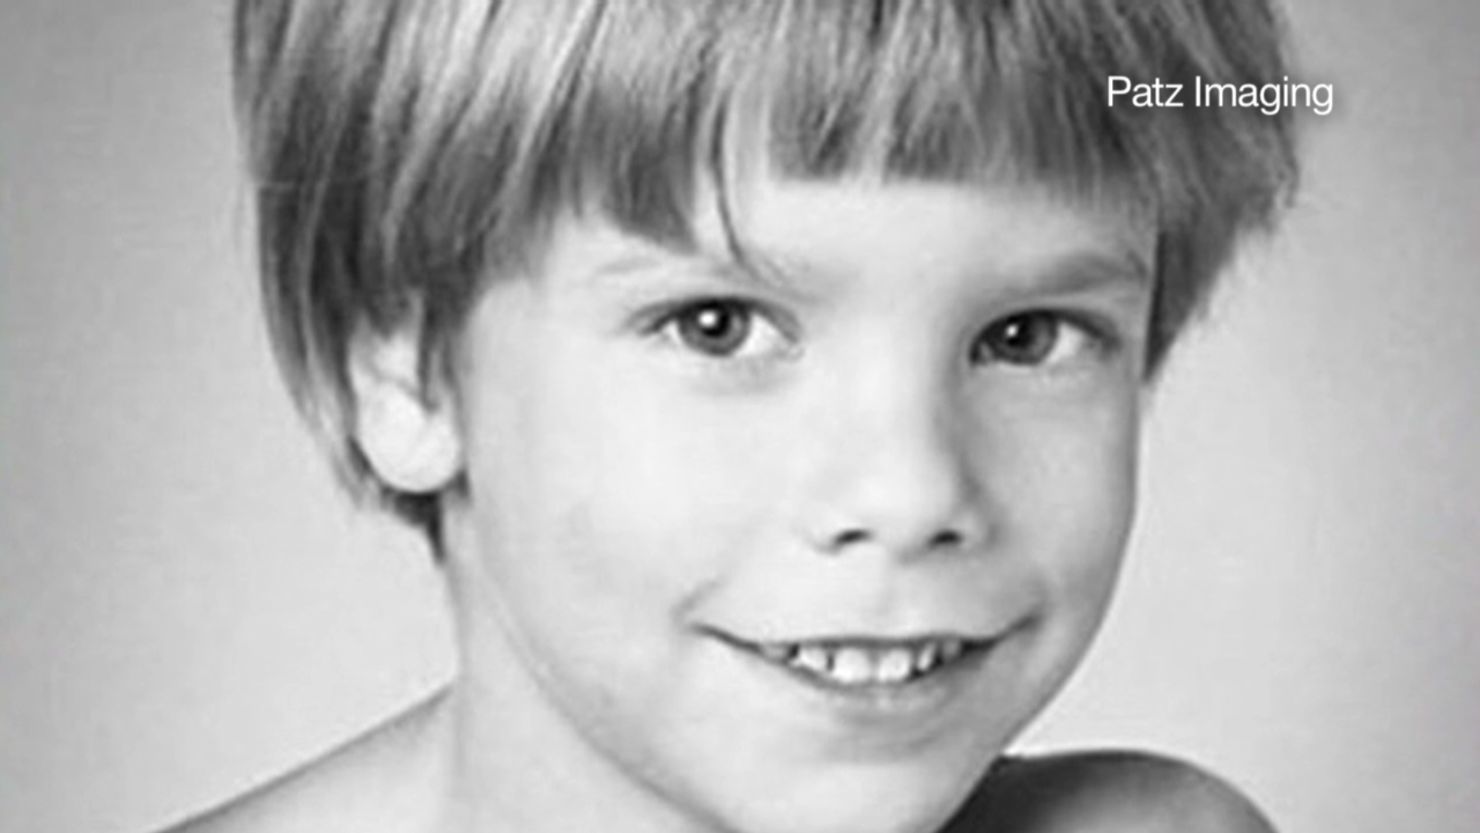 The disappearance of little Etan Patz gripped the nation more than 30 years ago.